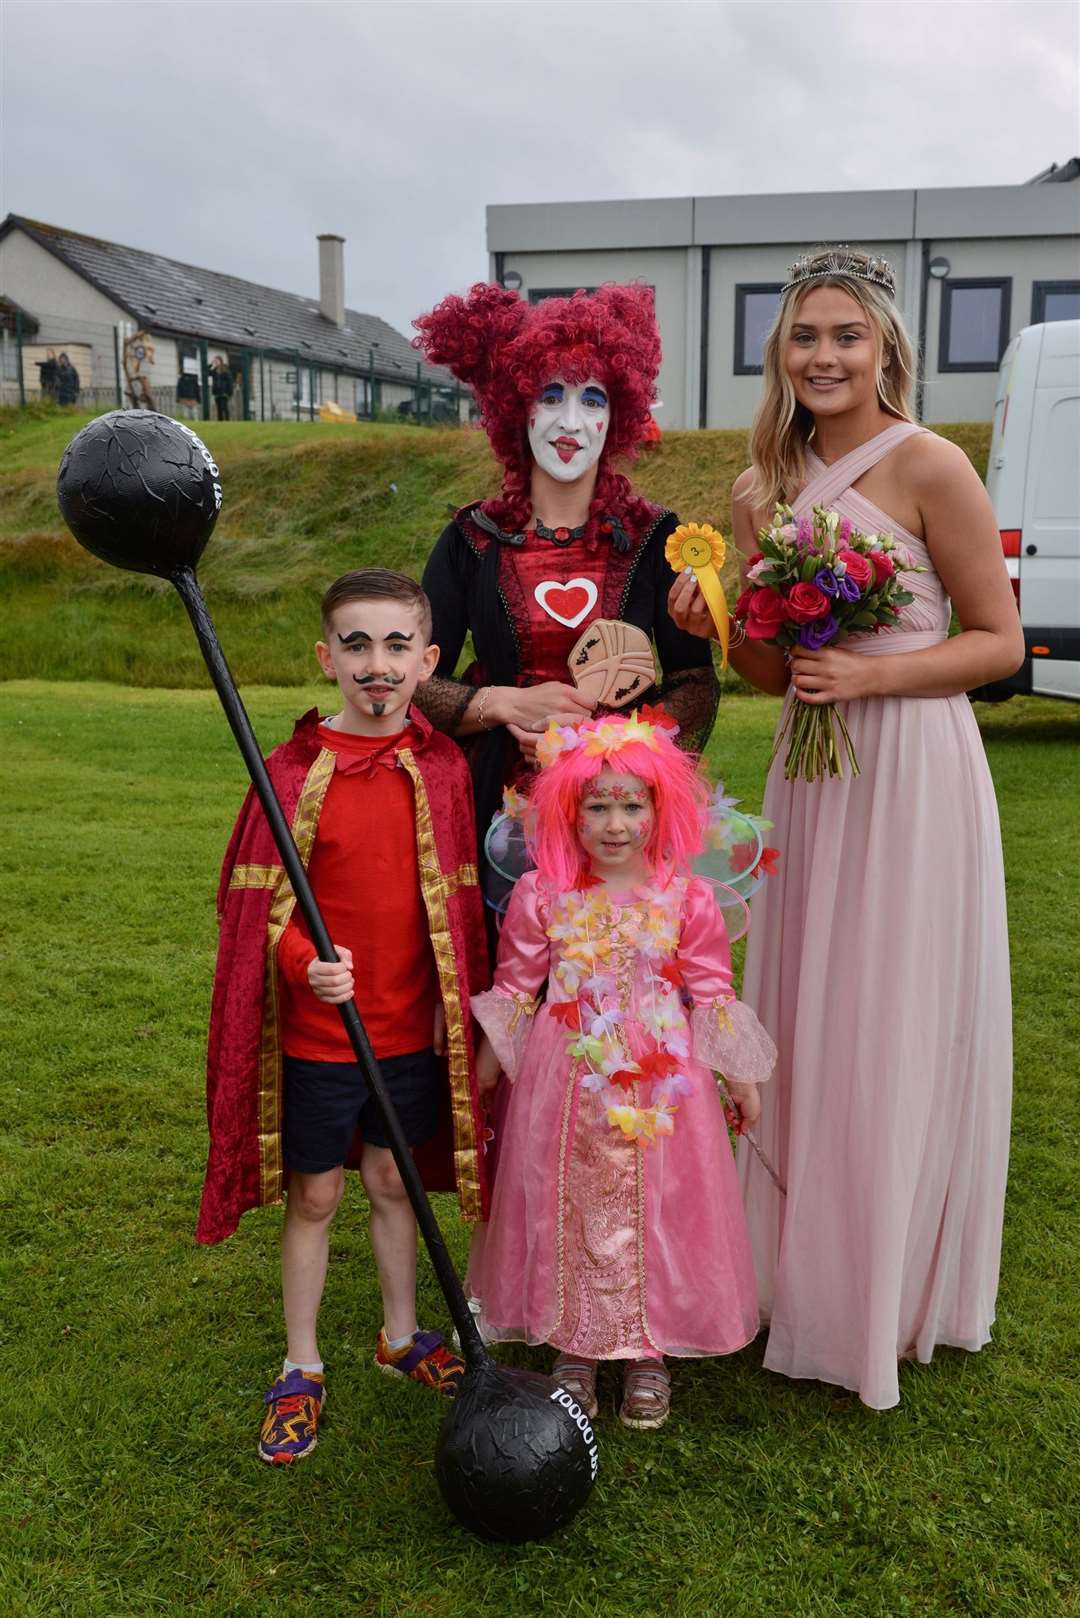 The Macdonald family came third in the walking parade. Picture: Jim A Johnston